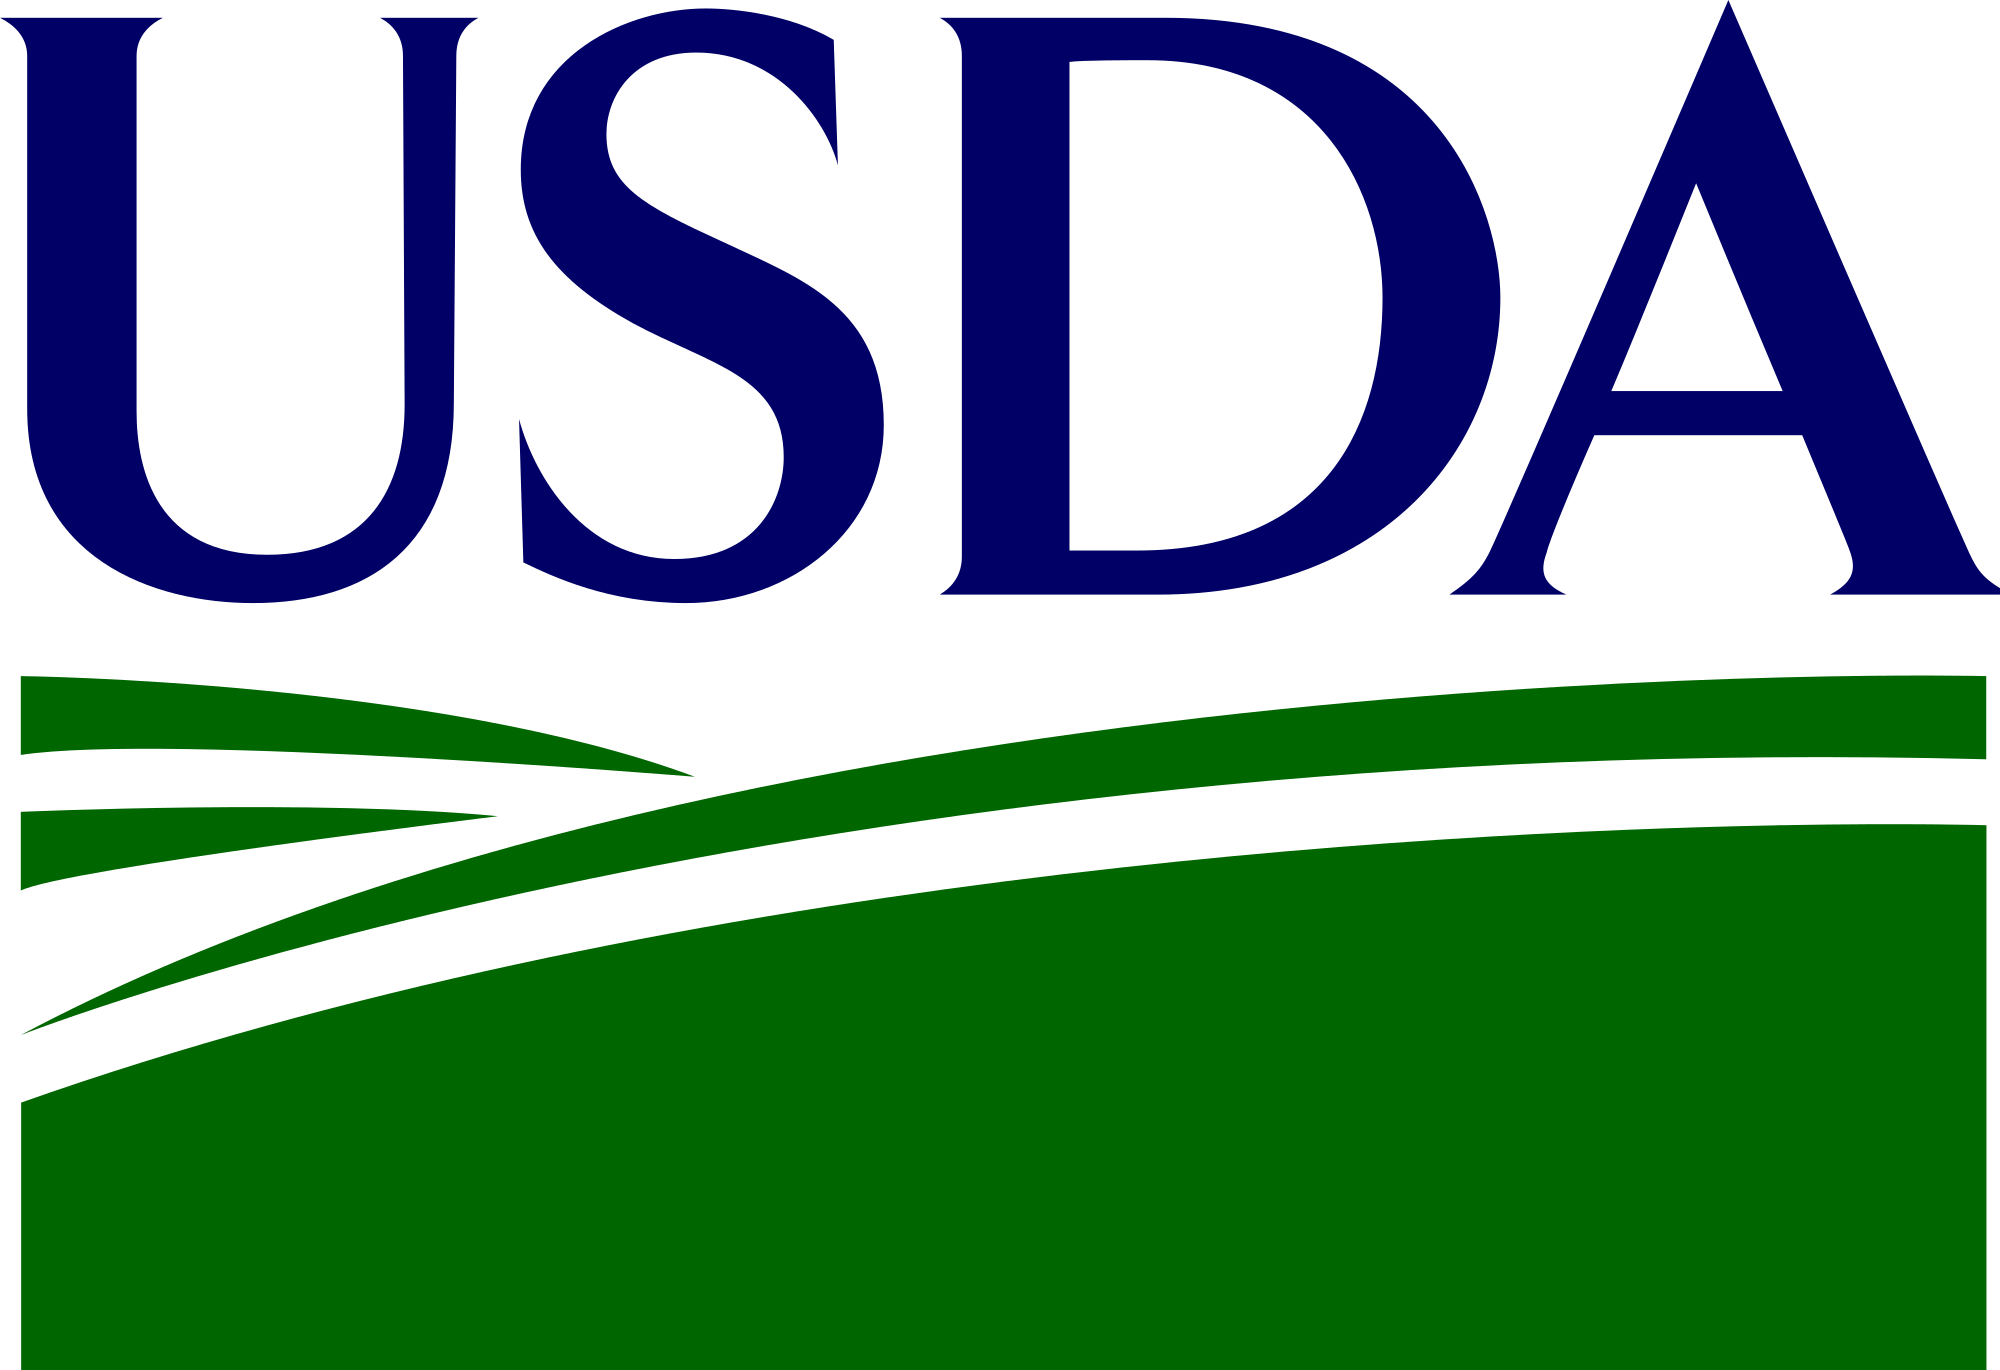 Diurnal Cycling In Forage Quality - Us Department Of Agriculture (2000x1370)